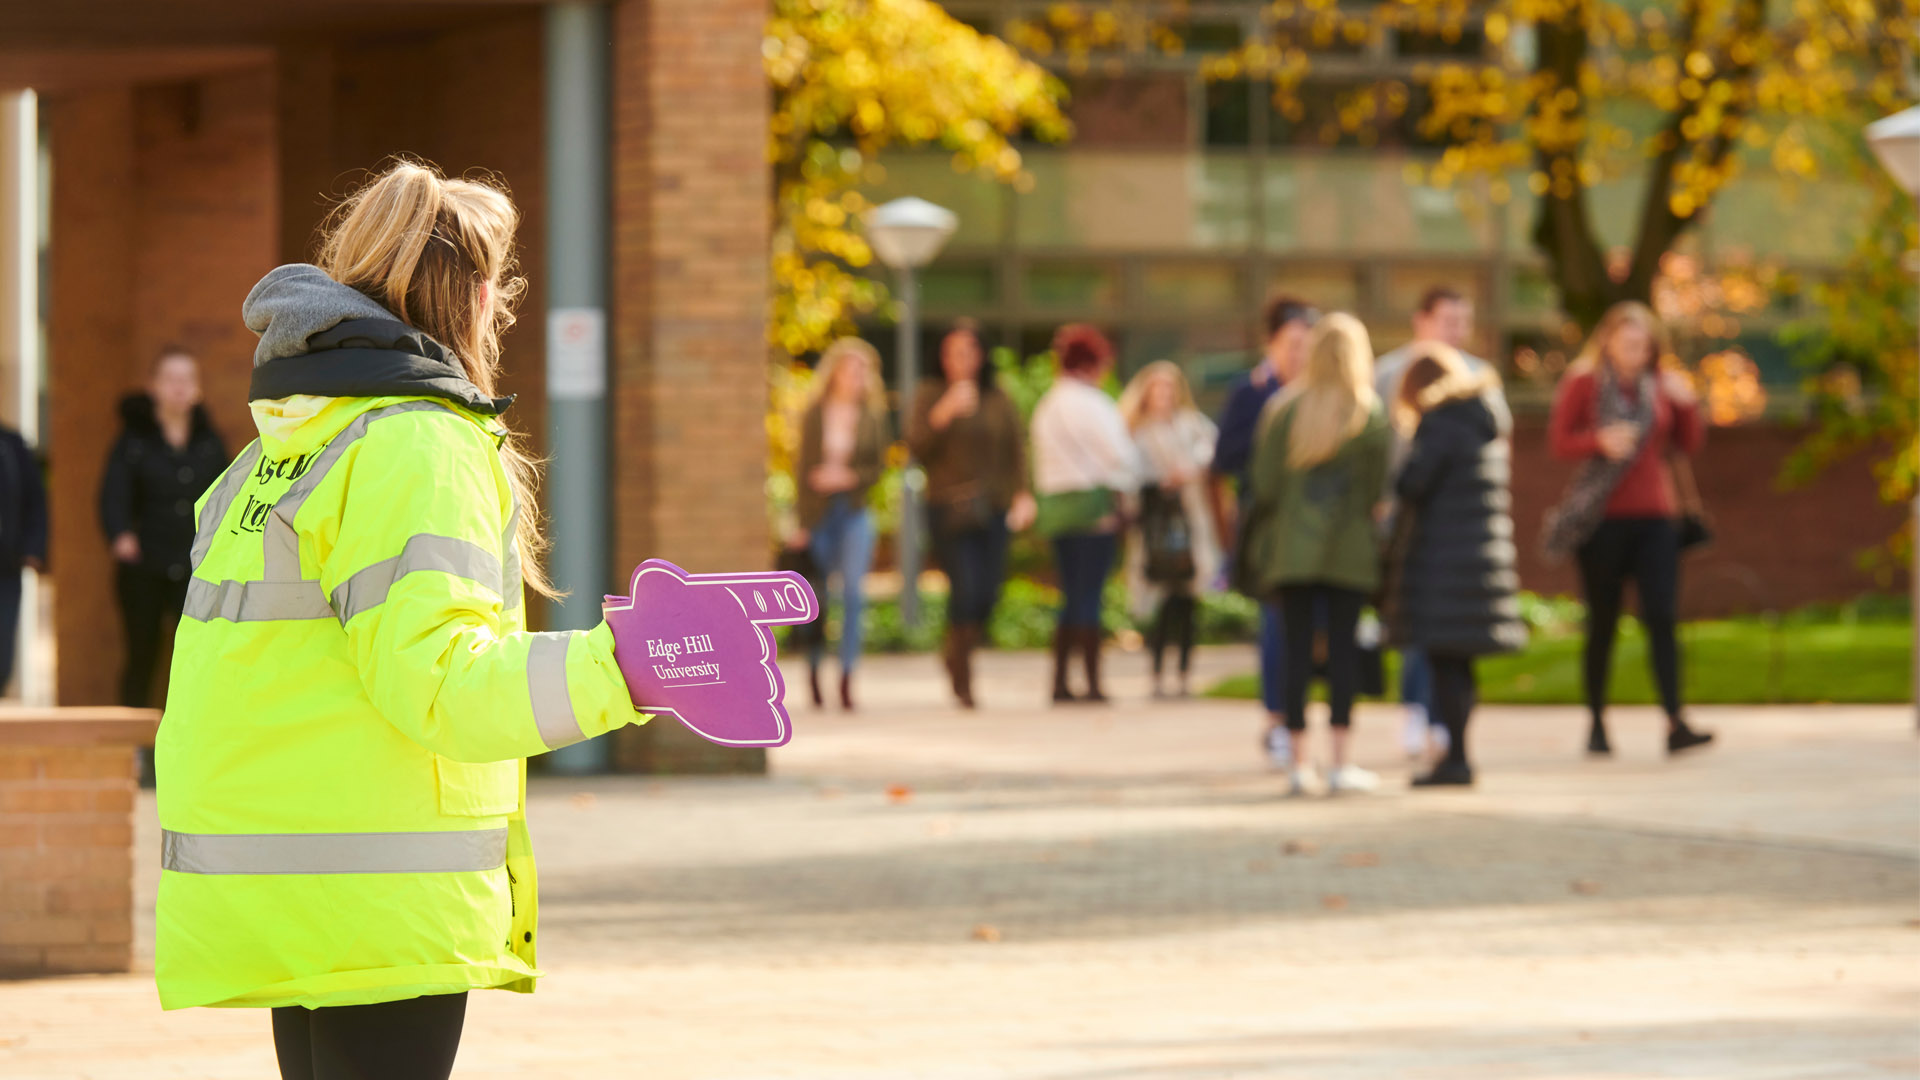 A woman seen from behind in the left of the image, wearing high vis and a purple foam finger that says edge hill university. In the background are a group walking toward her.